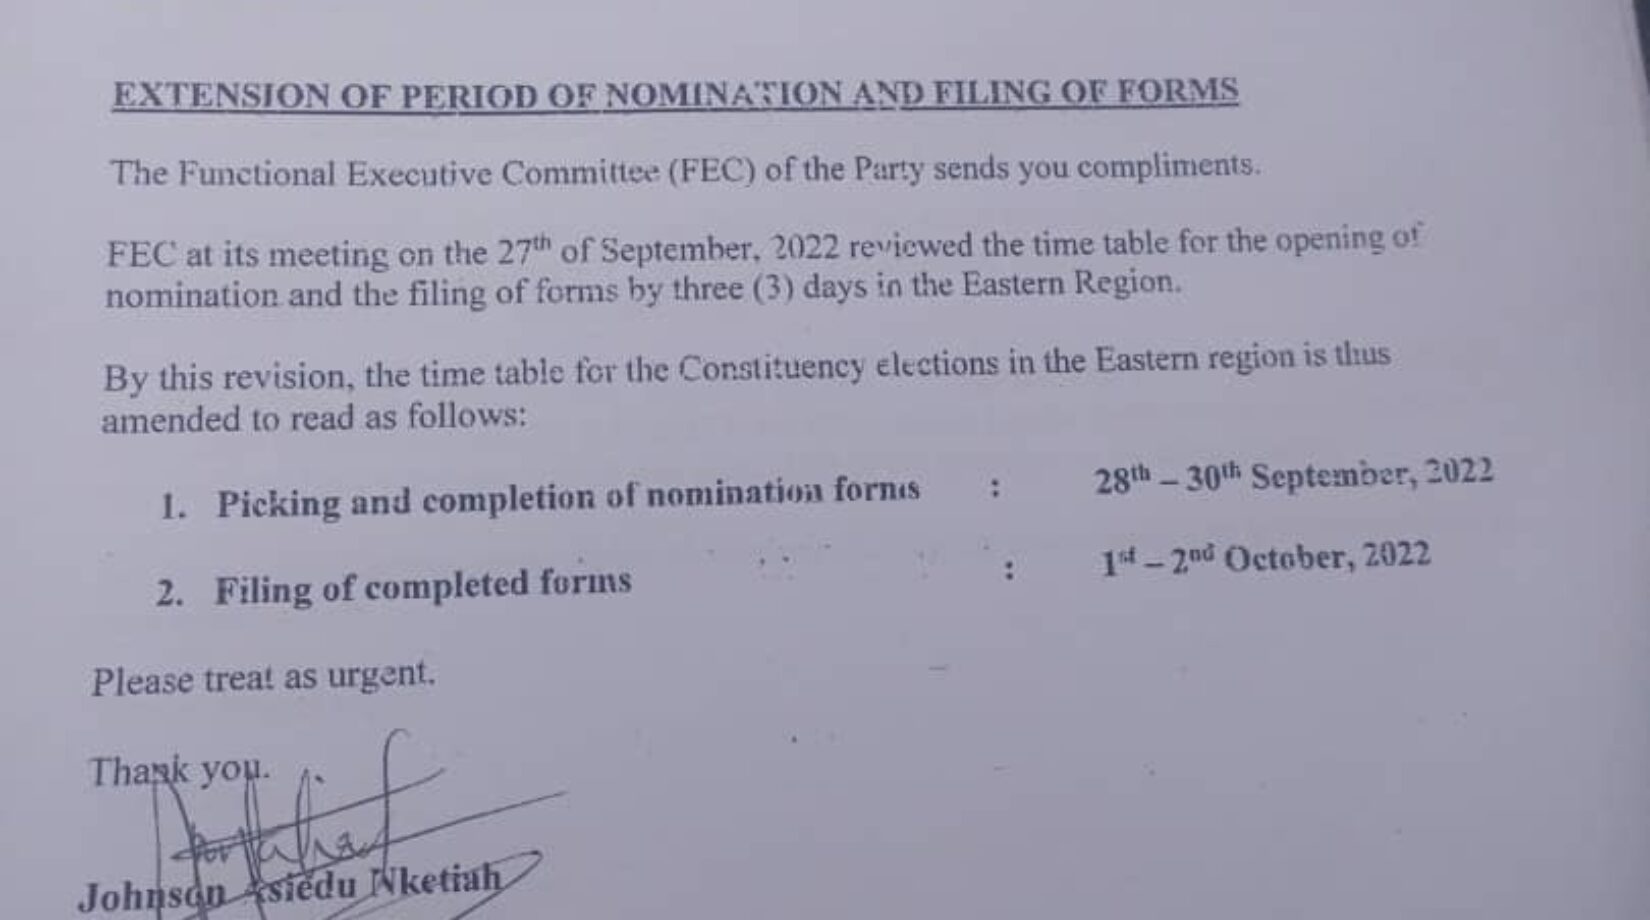 NDC on Extension of Period of Nomination and Filing of forms for Eastern region